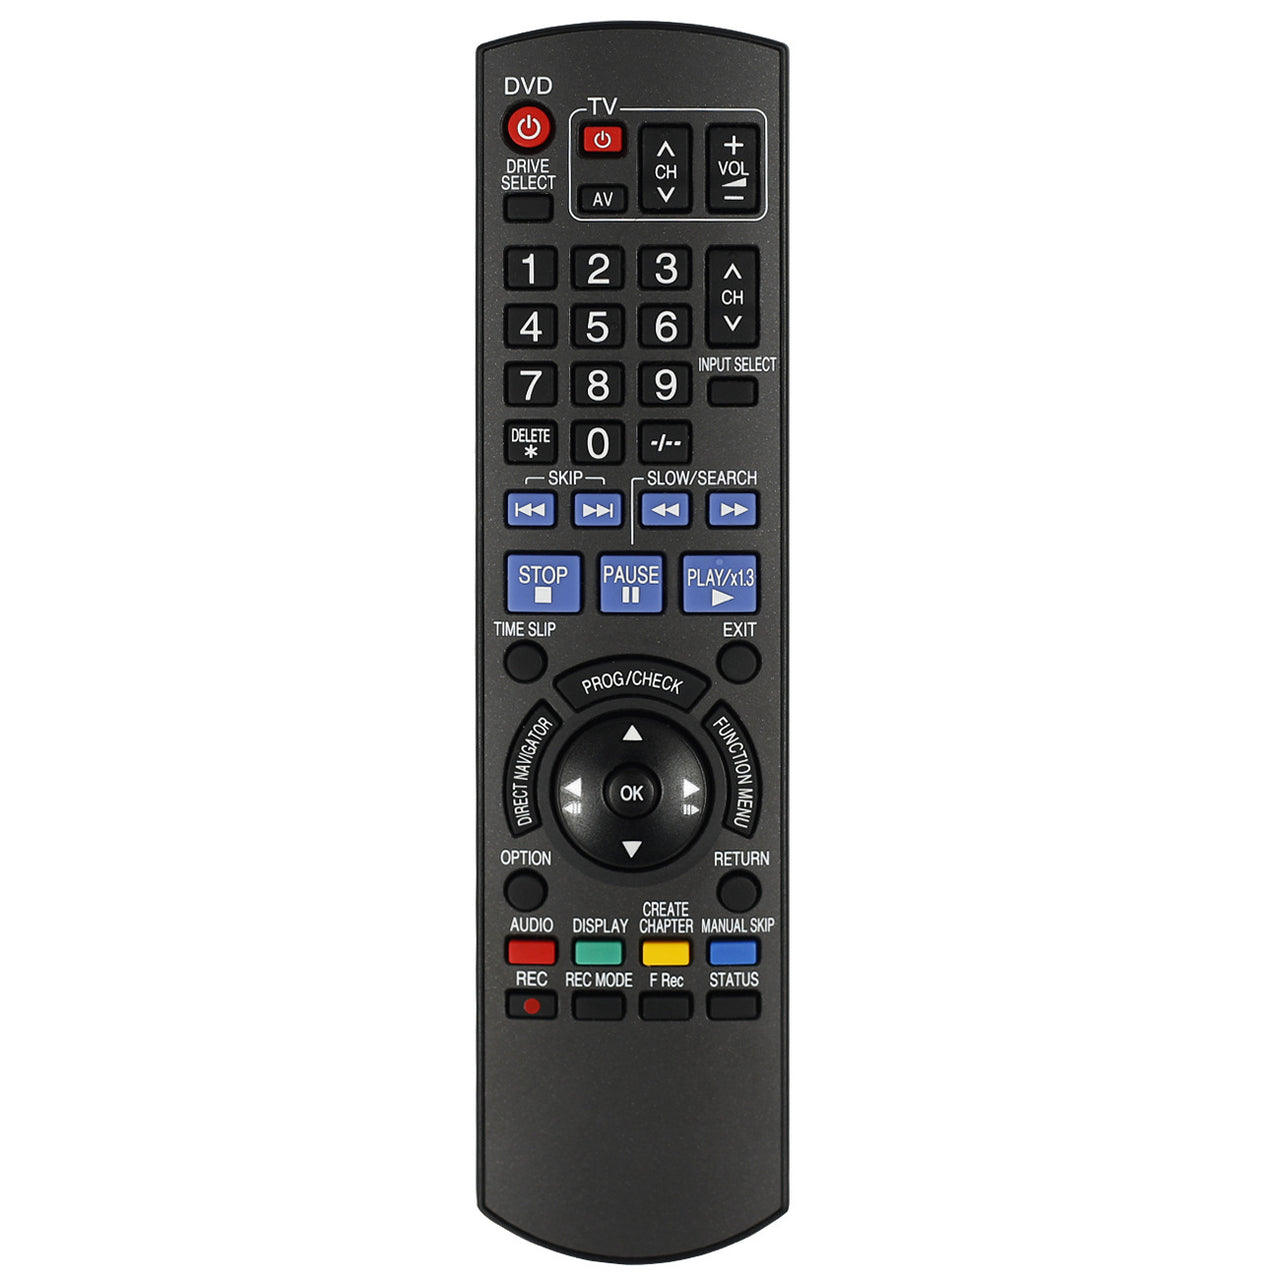 N2QAYB000134 Replacement Remote for Panasonic DVD Recorders